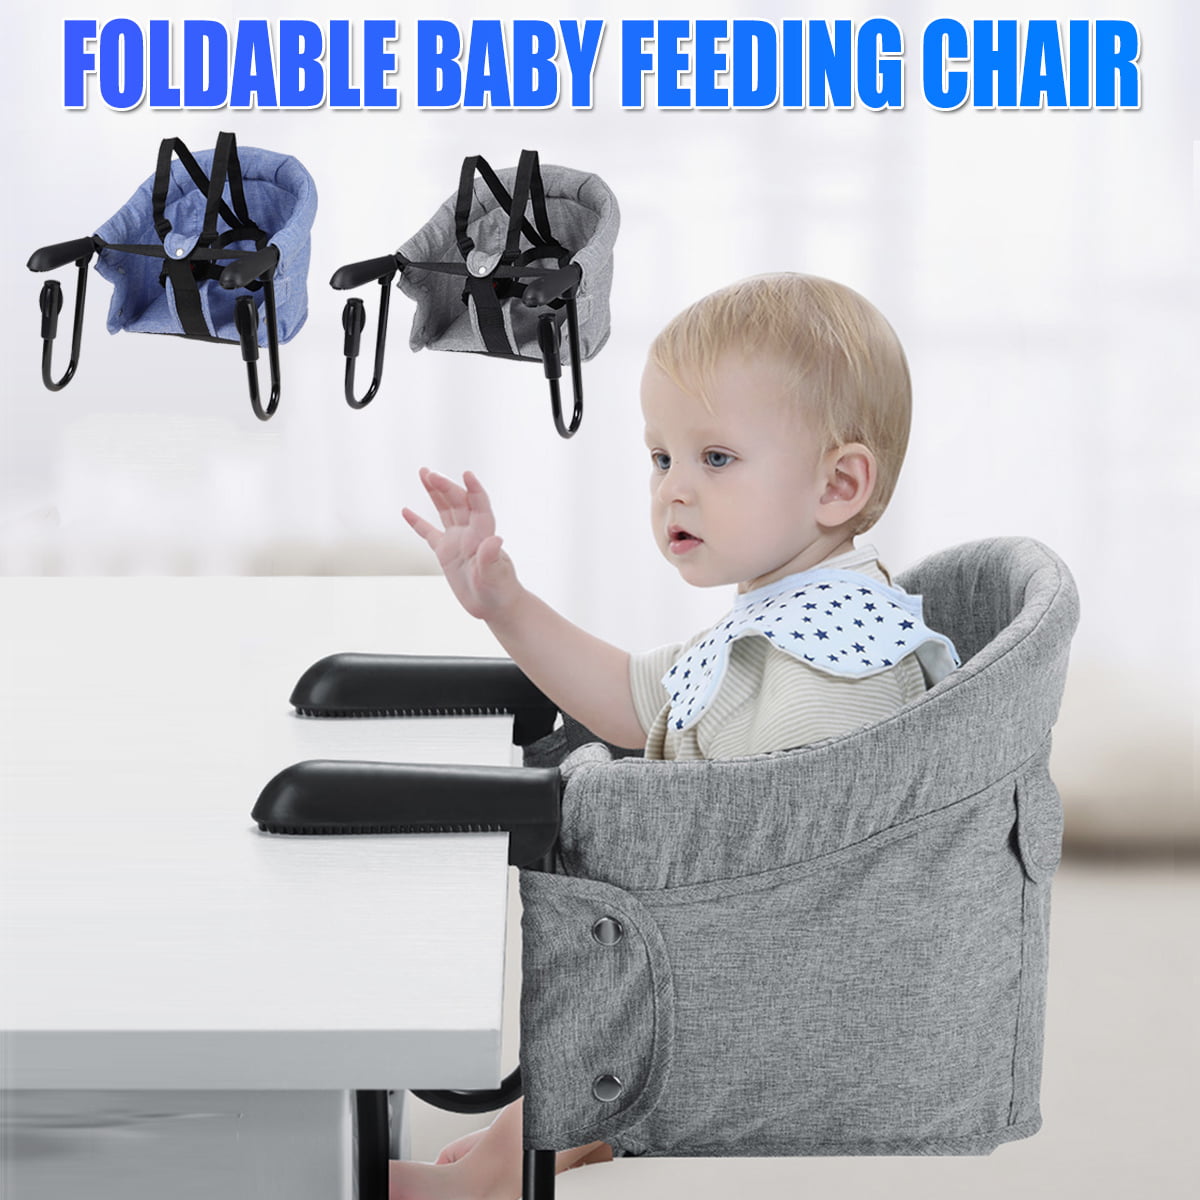 Hook On Chair Fast Table Chair High Load Design Fold Flat Storage Tight Fixing Clip on Table High Chair Removable Seat Grey 